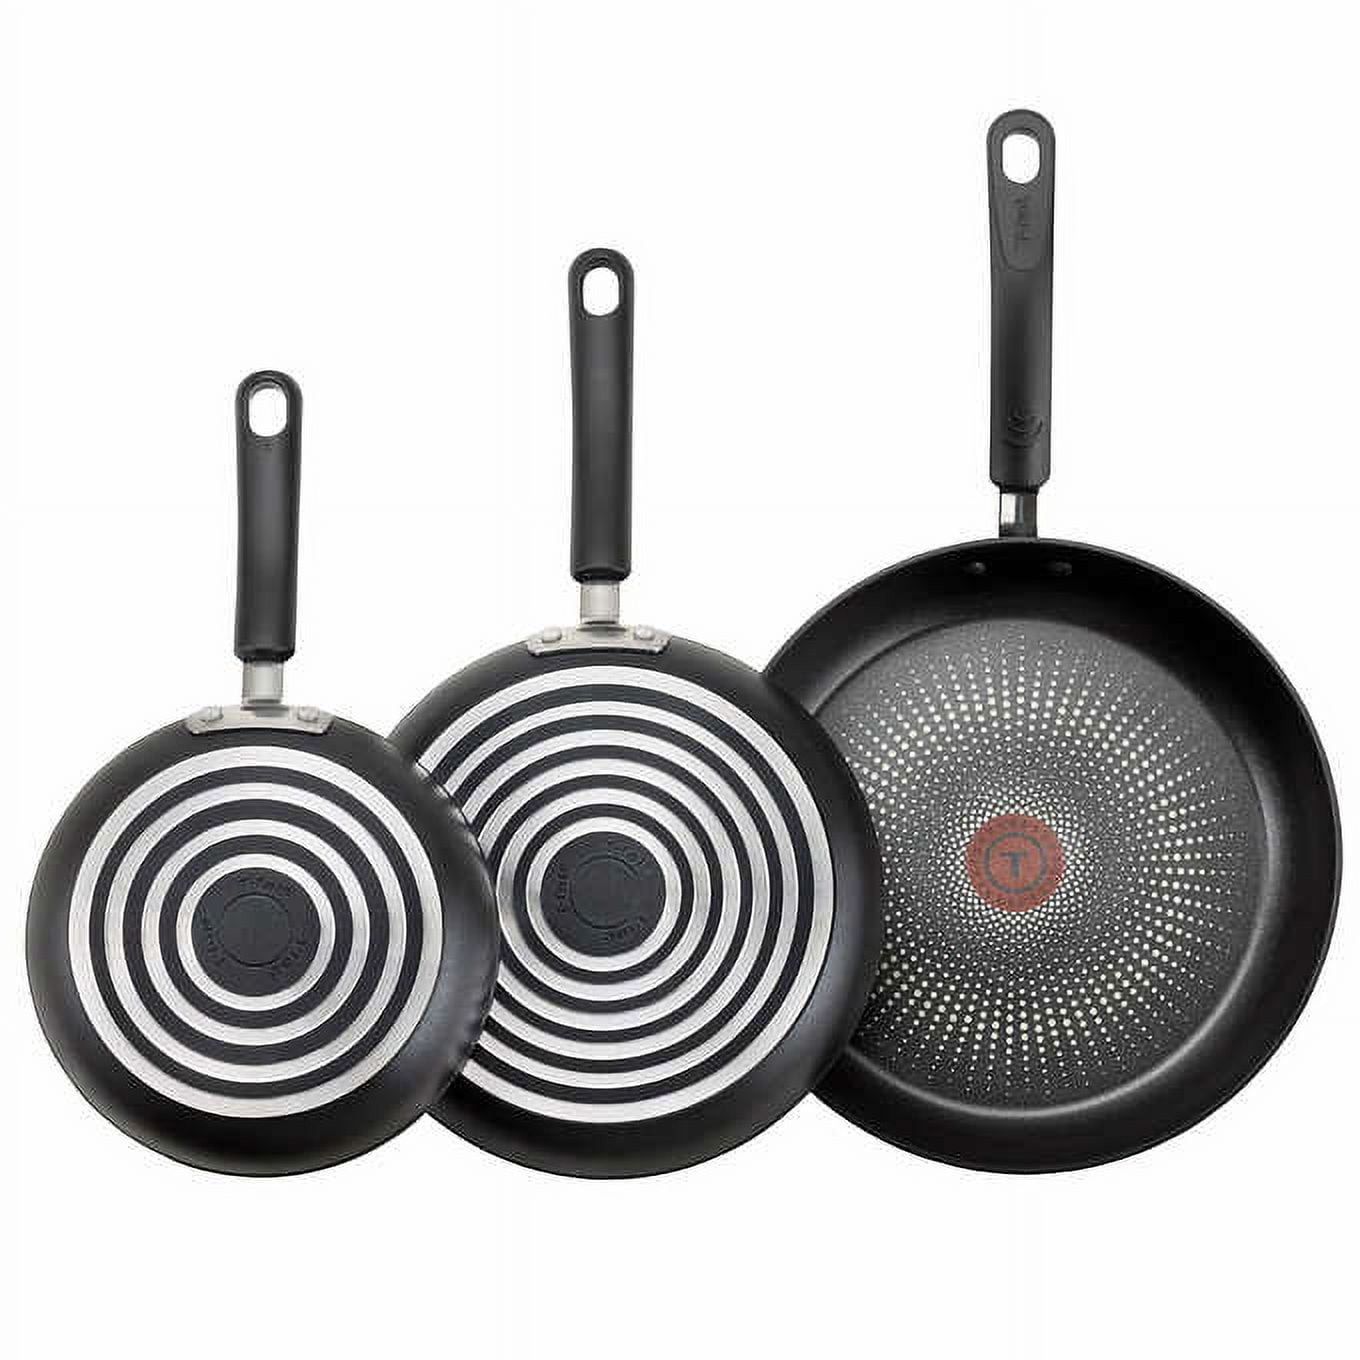 T-Fal A857S3 Specialty Nonstick Omelette Pan 8-Inch 9.5-Inch And 11-Inch  Dishwasher Safe Pfoa Free Fry Pan / Saute Pan Cookware Set, 3-Piece, Gray